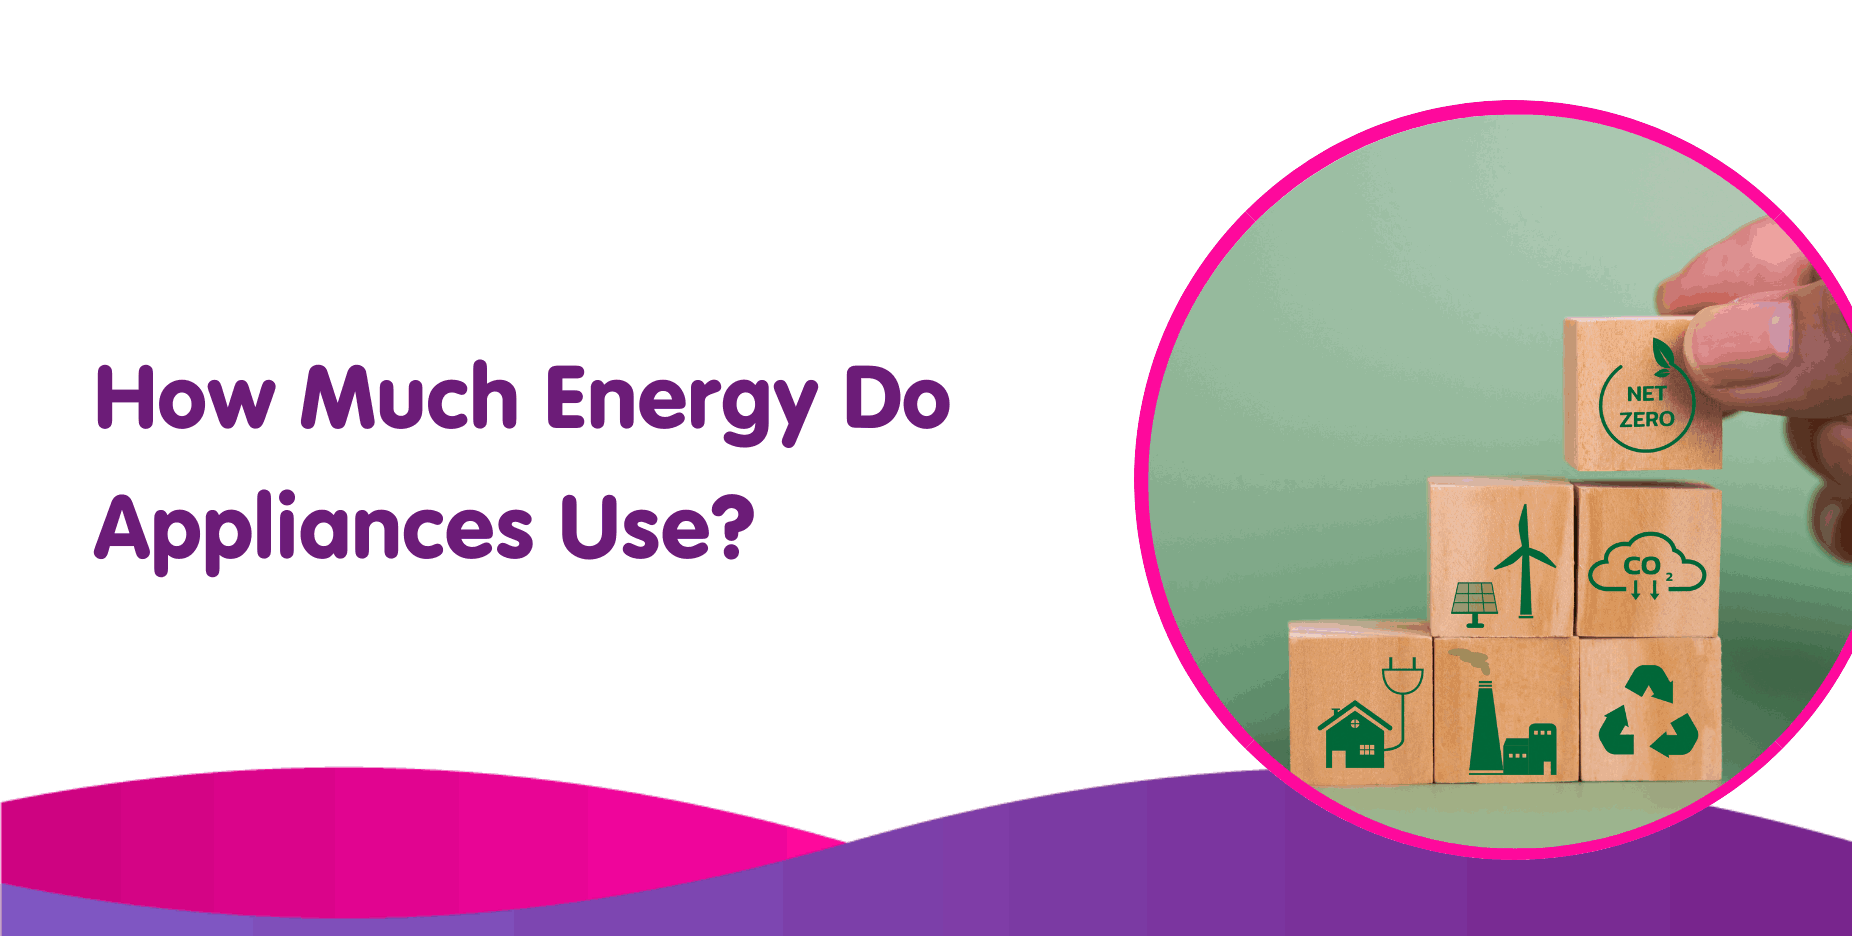 How Much Energy Do Appliances Use?